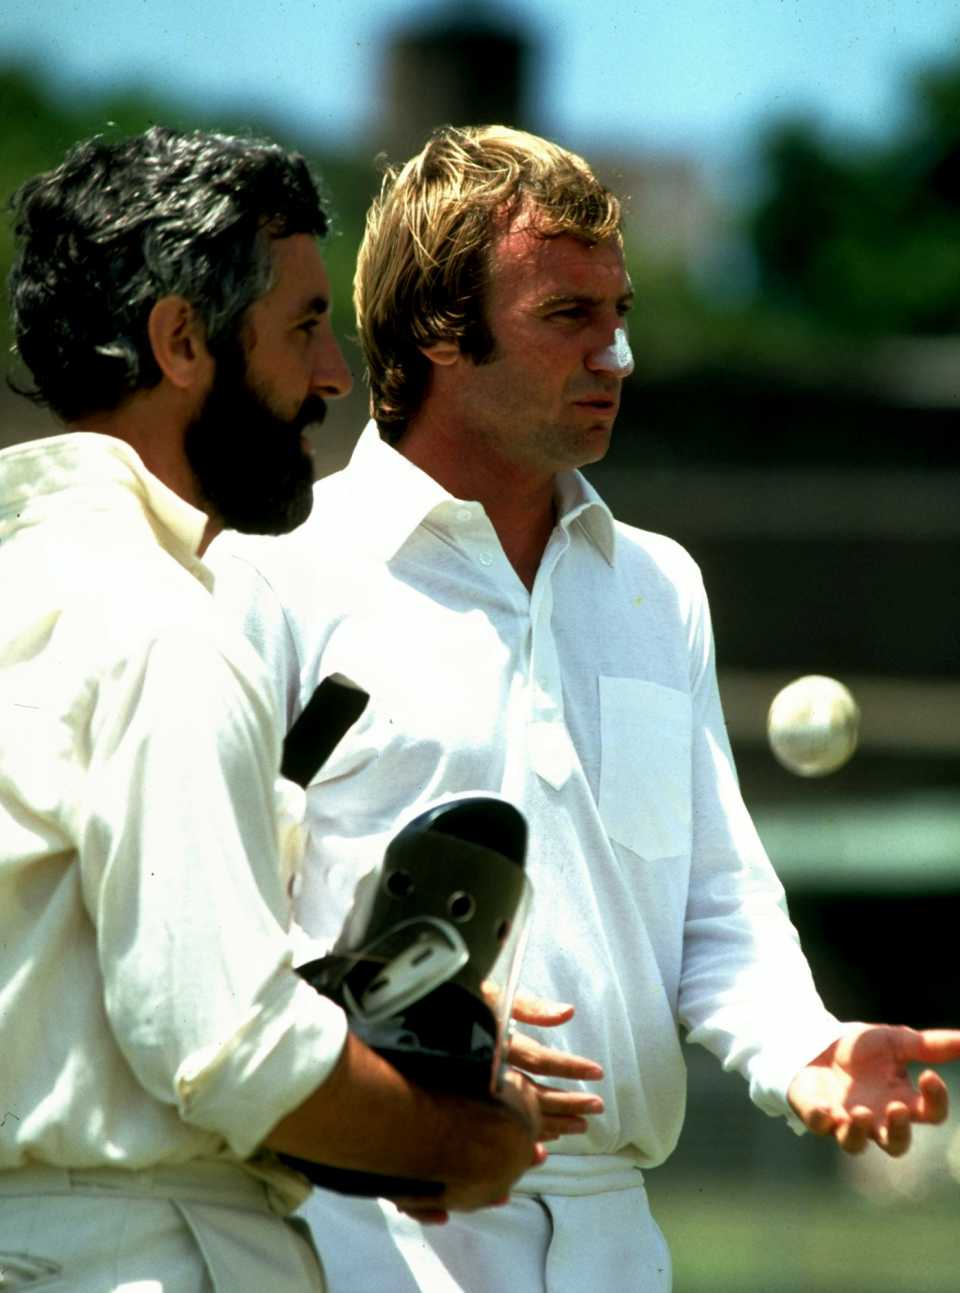 Mike Brearley and John Lever discuss their options before the start of play